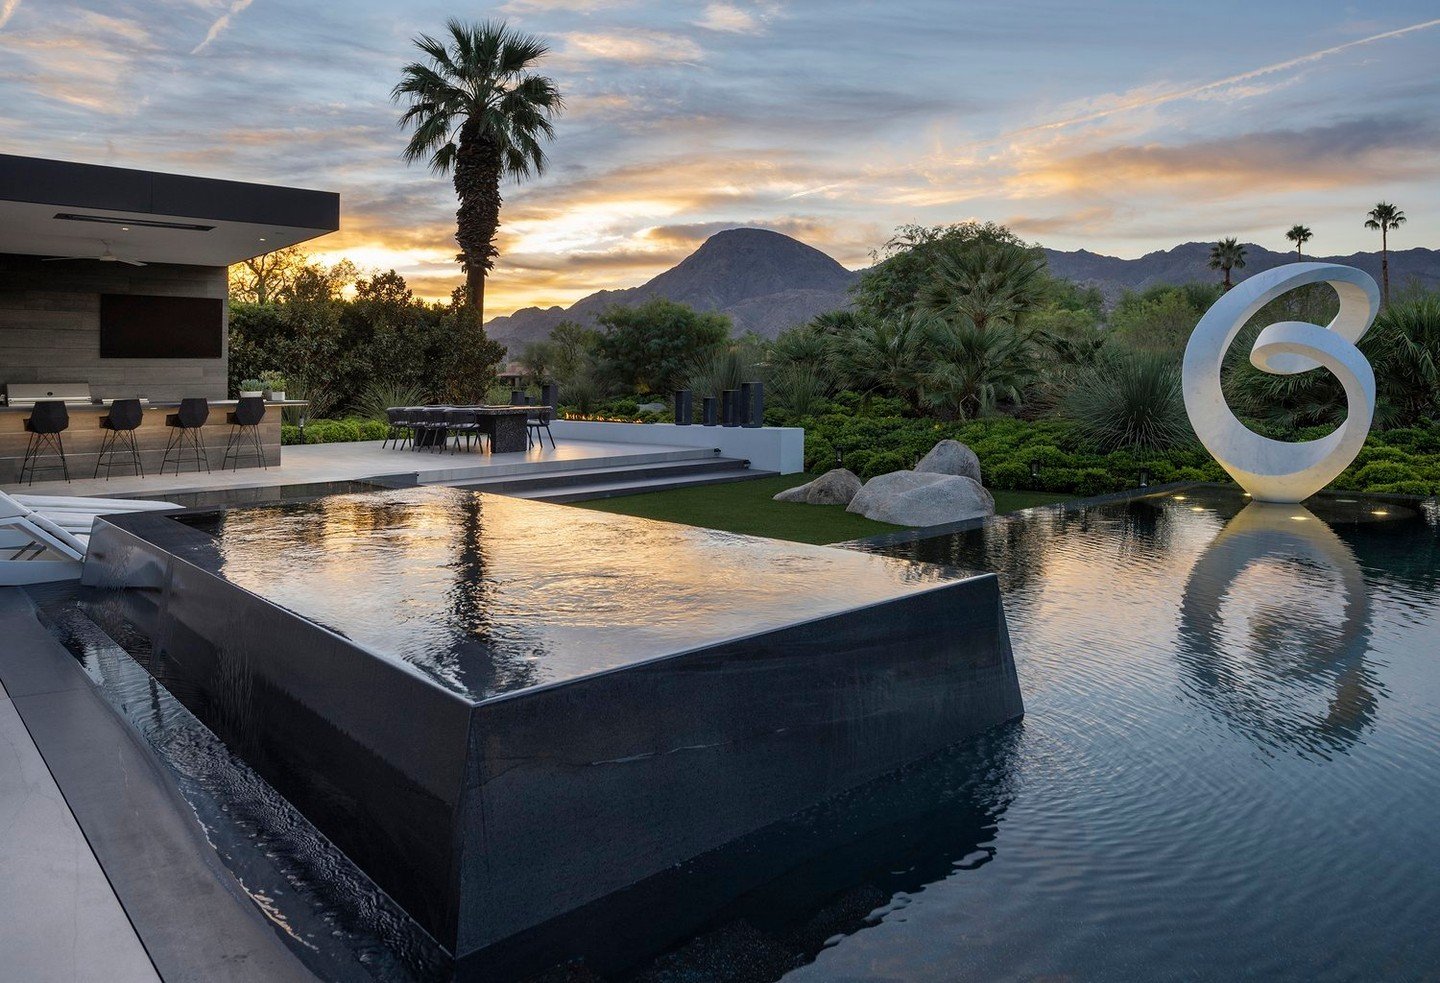 A pool with a view, Serenity's oasis in the desert... Photo by @maccollum, sculpture by @richard_erdman